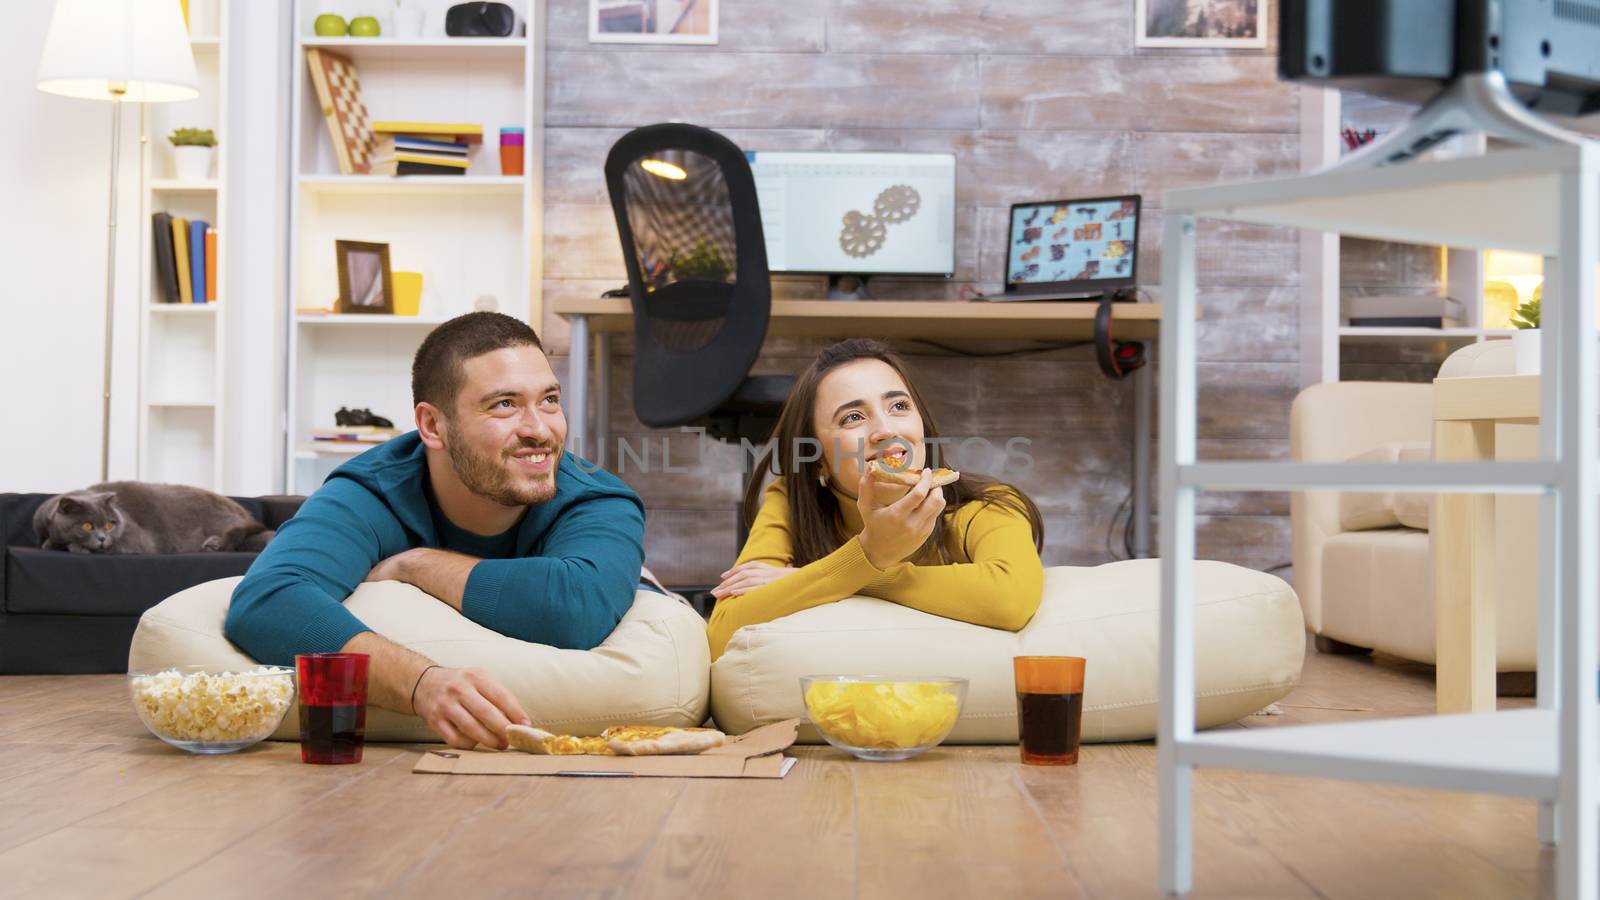 Happy caucasian couple eating pizza sitting on pillows for the floor watching tv while their cat is relaxing in the background.